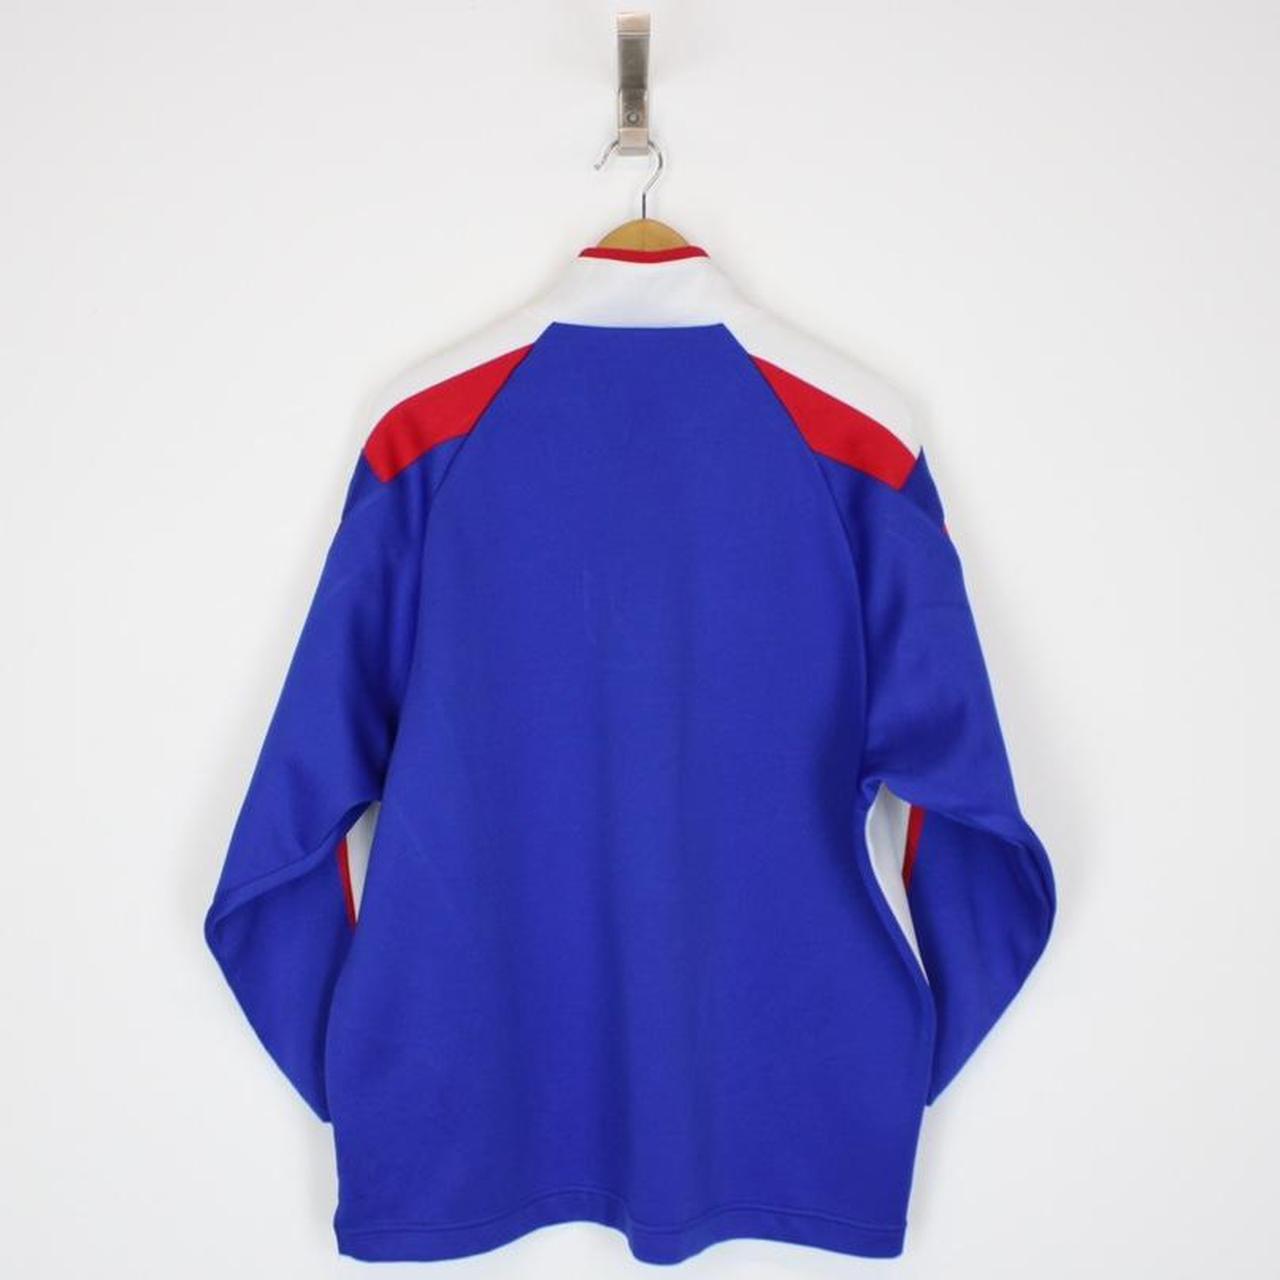 Vintage 90s Adidas Blue, White and Red 1/4 Zip... - Depop